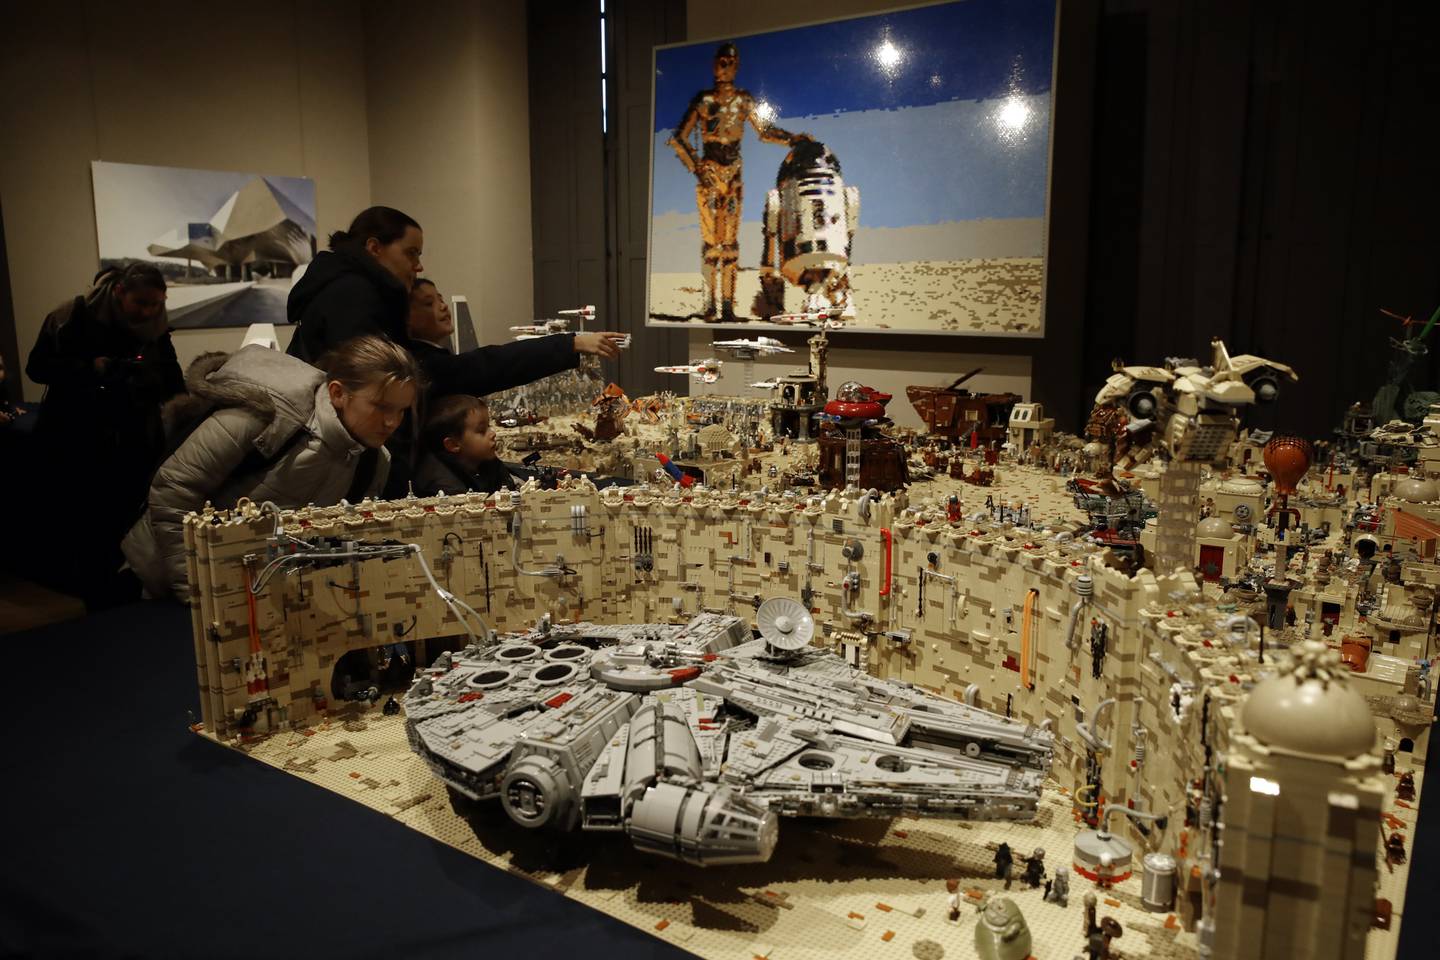 Children watch a Lego sculpture depicting a scene of the movie Star Wars during an exhibition « Ciné en Briques » (Cine Bricks), in Versailles, Wednesday, Dec. 18, 2019. The exhibition whose theme is cinema is created with Lego bricks and runs until Jan. 25. (AP Photo/Christophe Ena)